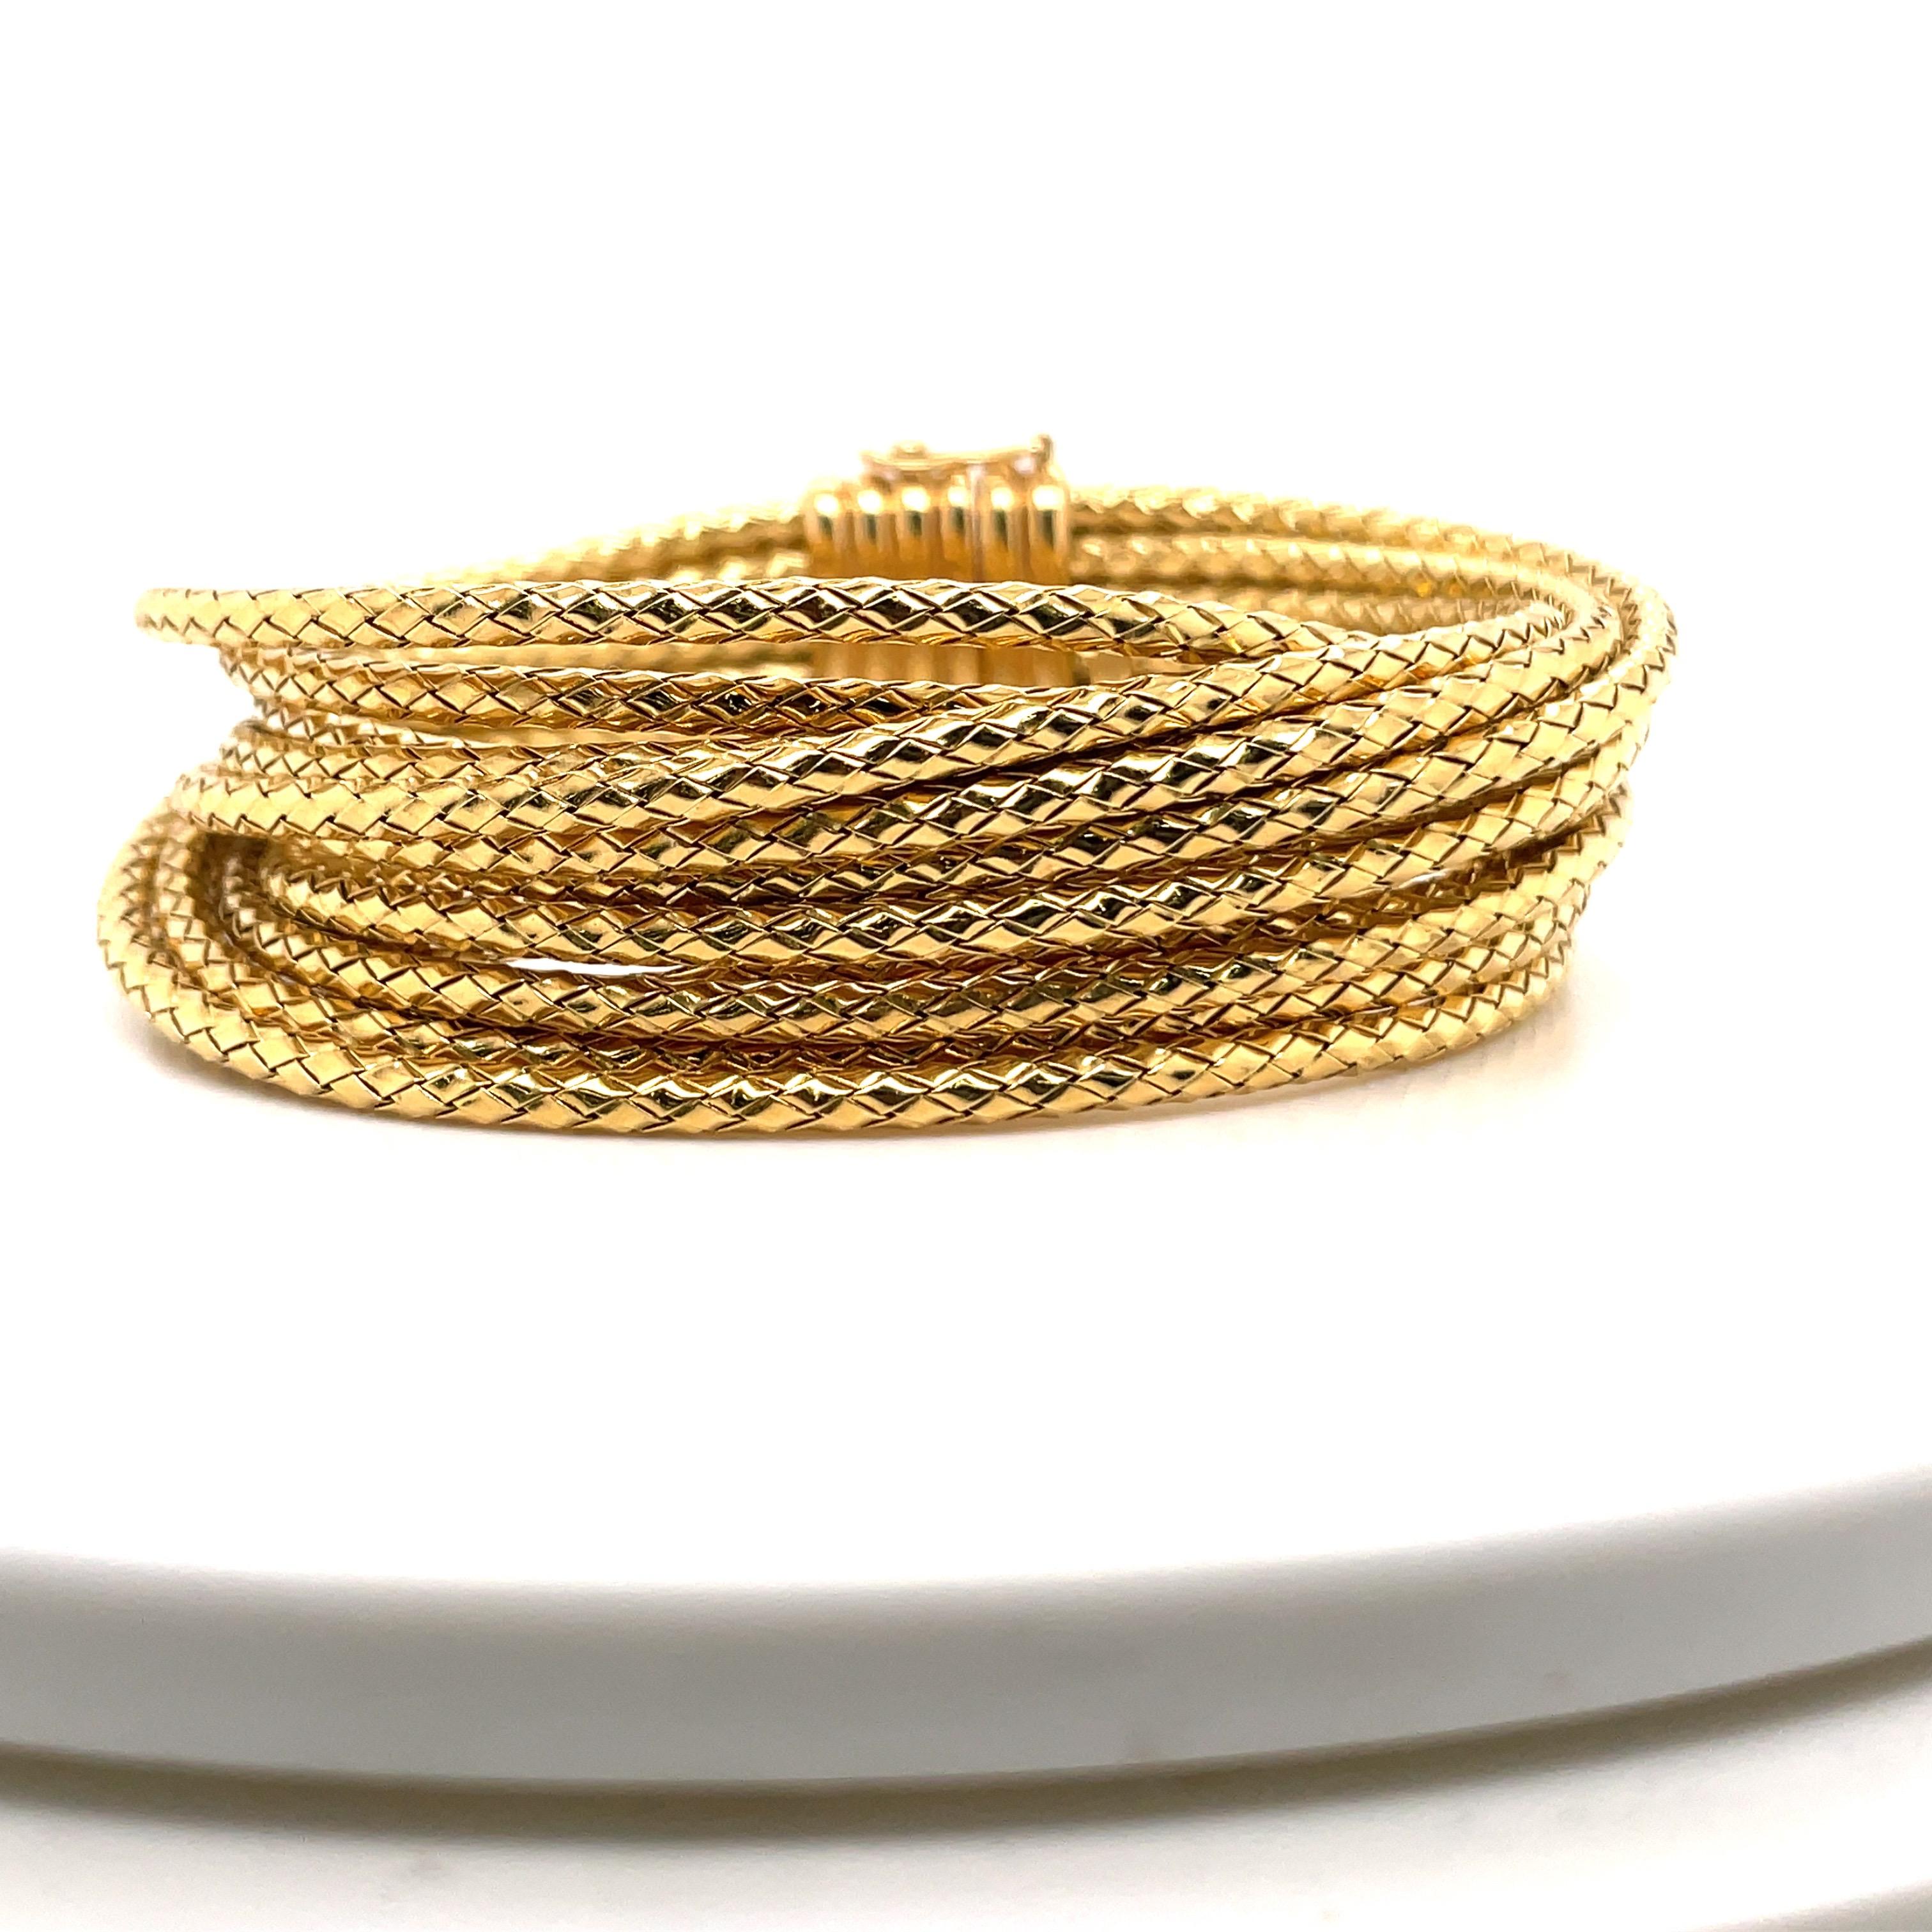 18 Karat Yellow Gold bracelet featuring 13 multi textured rope motif weighing 77.2 grams. Stamped 750 ROMA
Very comfortable!
Matching Necklace Available. 
More Gold Bracelets In Stock. 